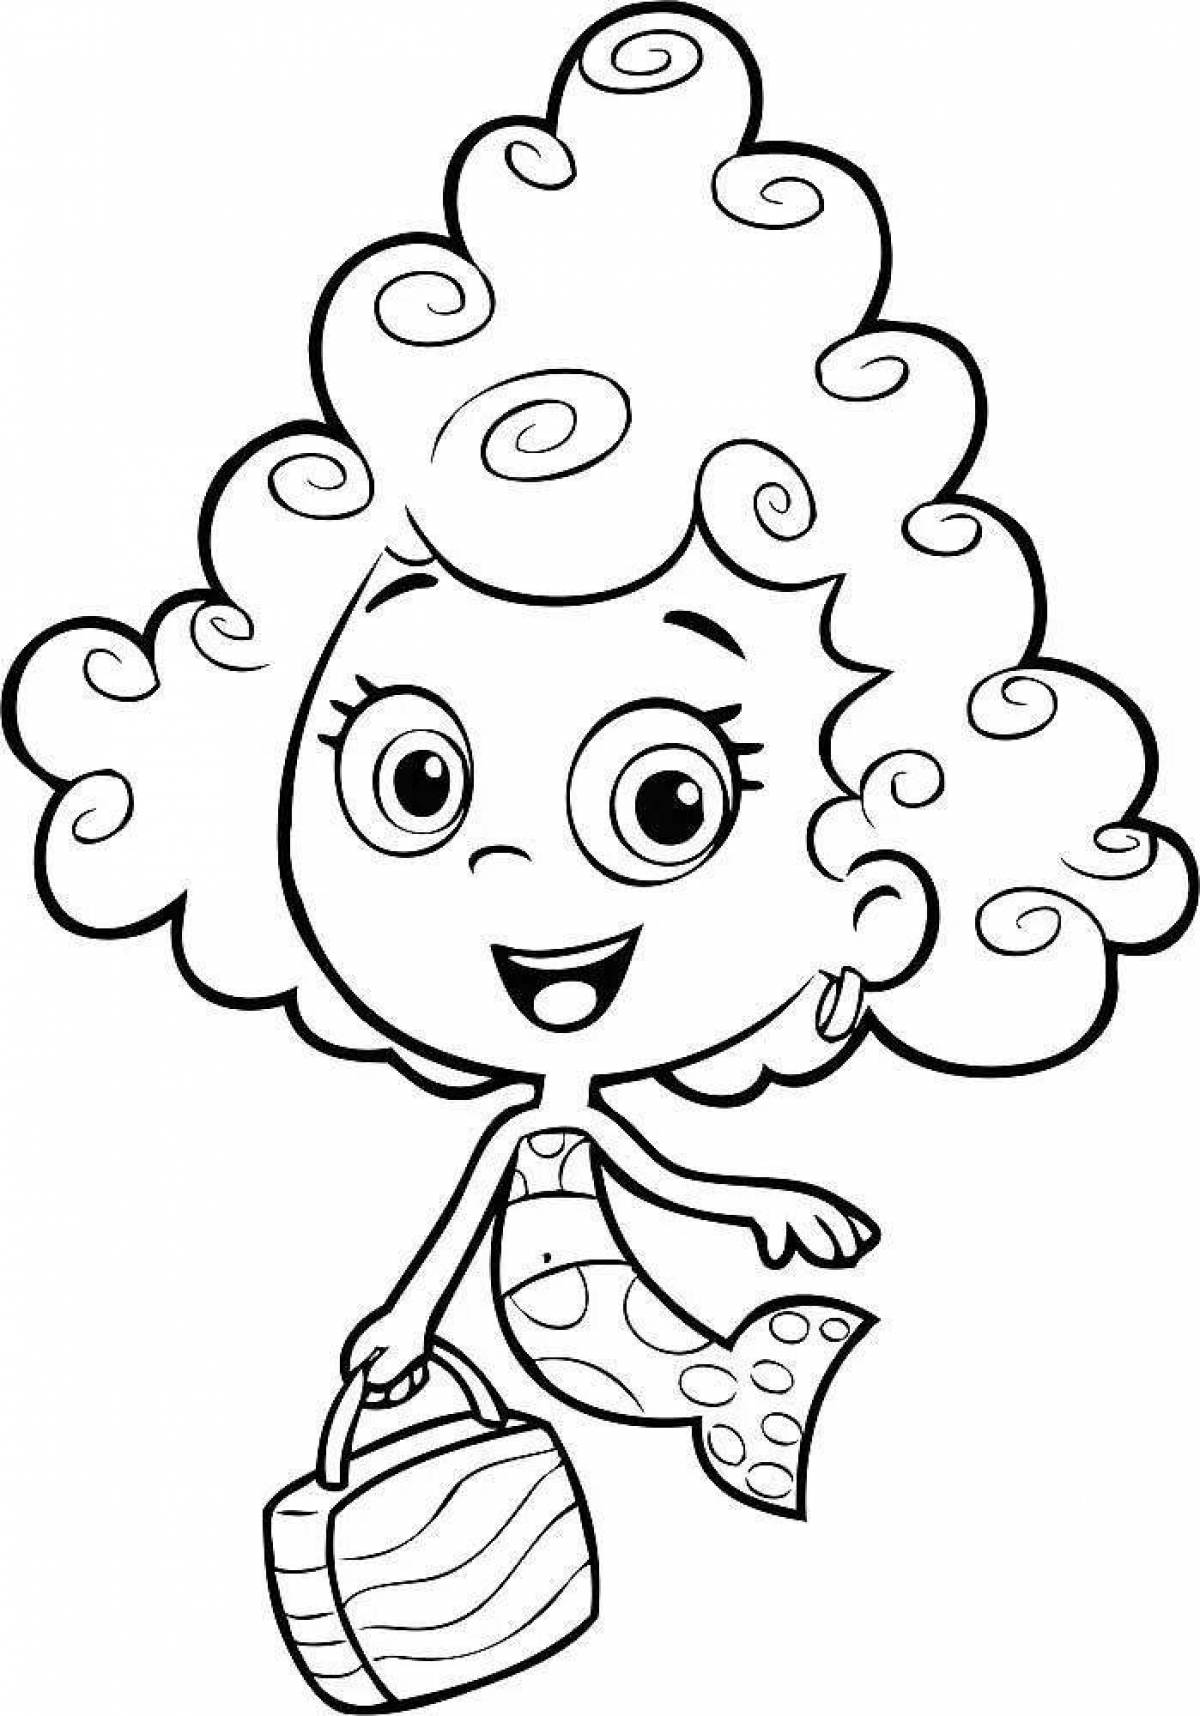 Channel fun carousel coloring page